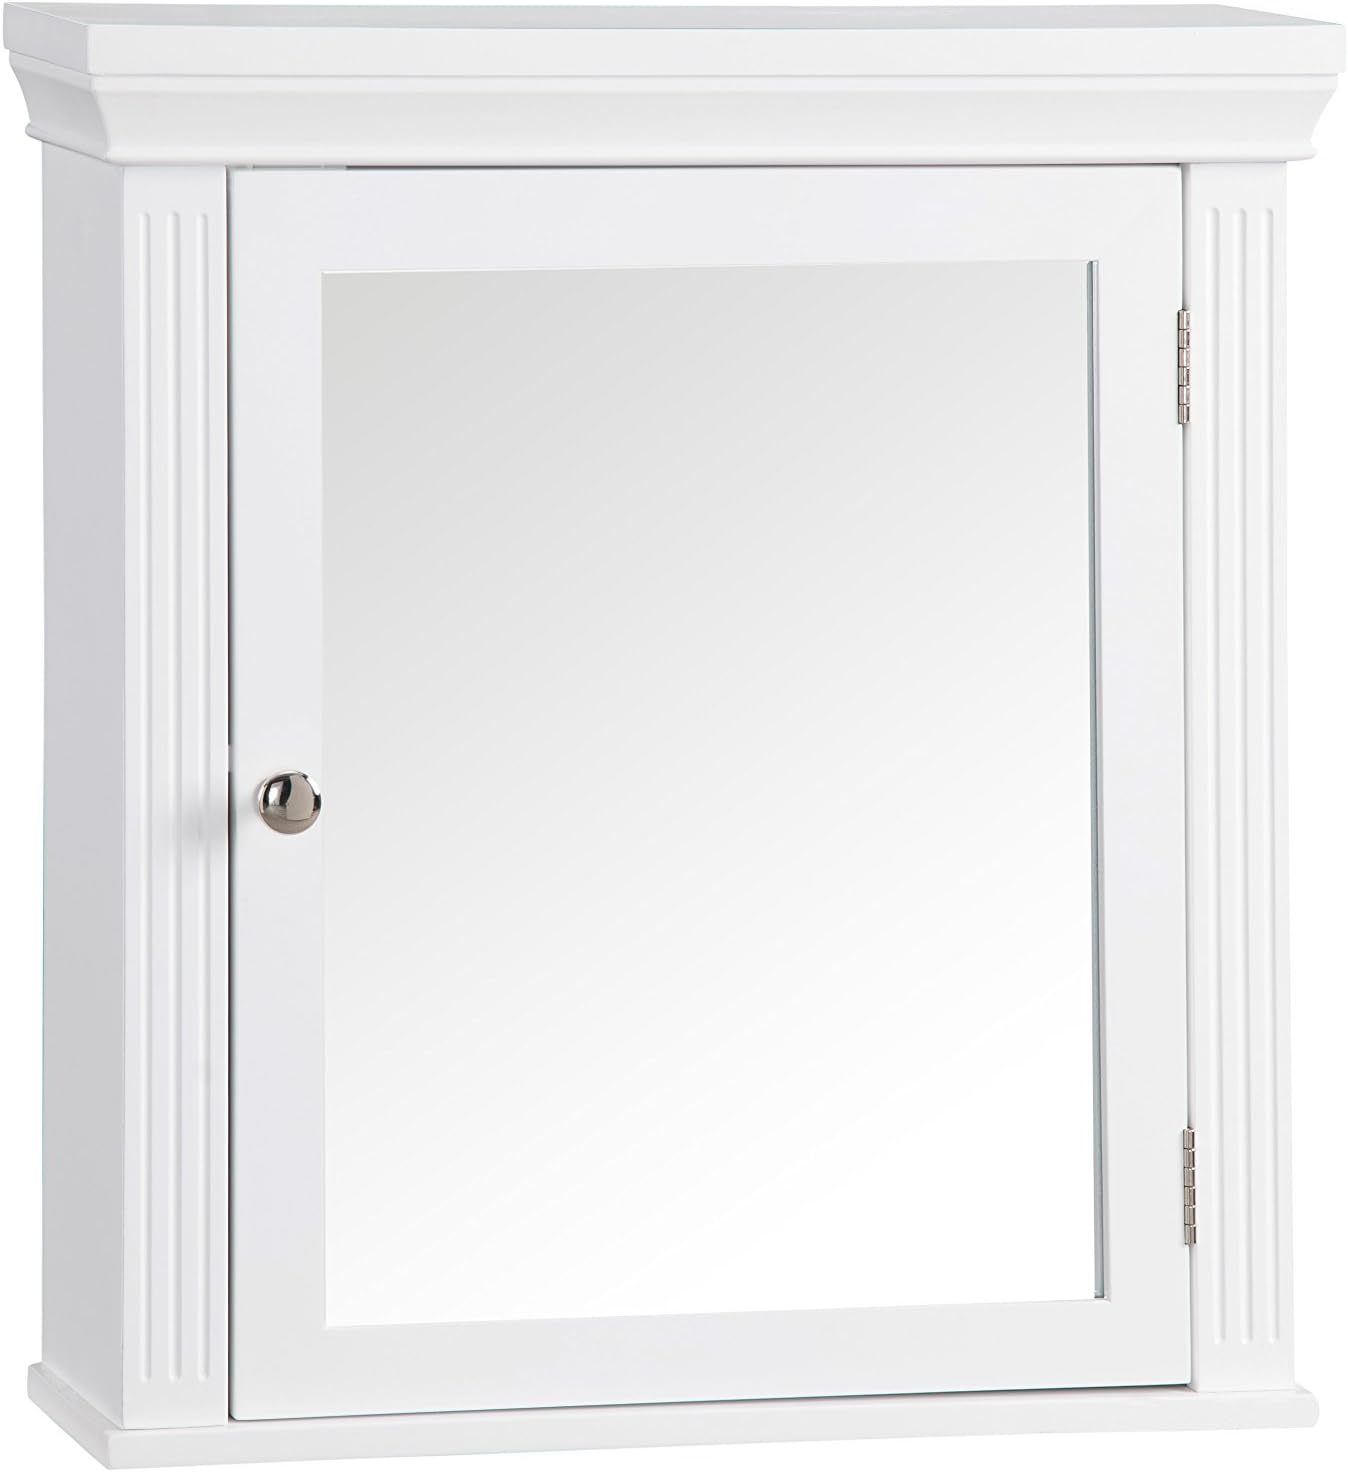 The Detachable Chestnut Medicine Wall Cabinet From Elegant Home Fashions In - $84.95